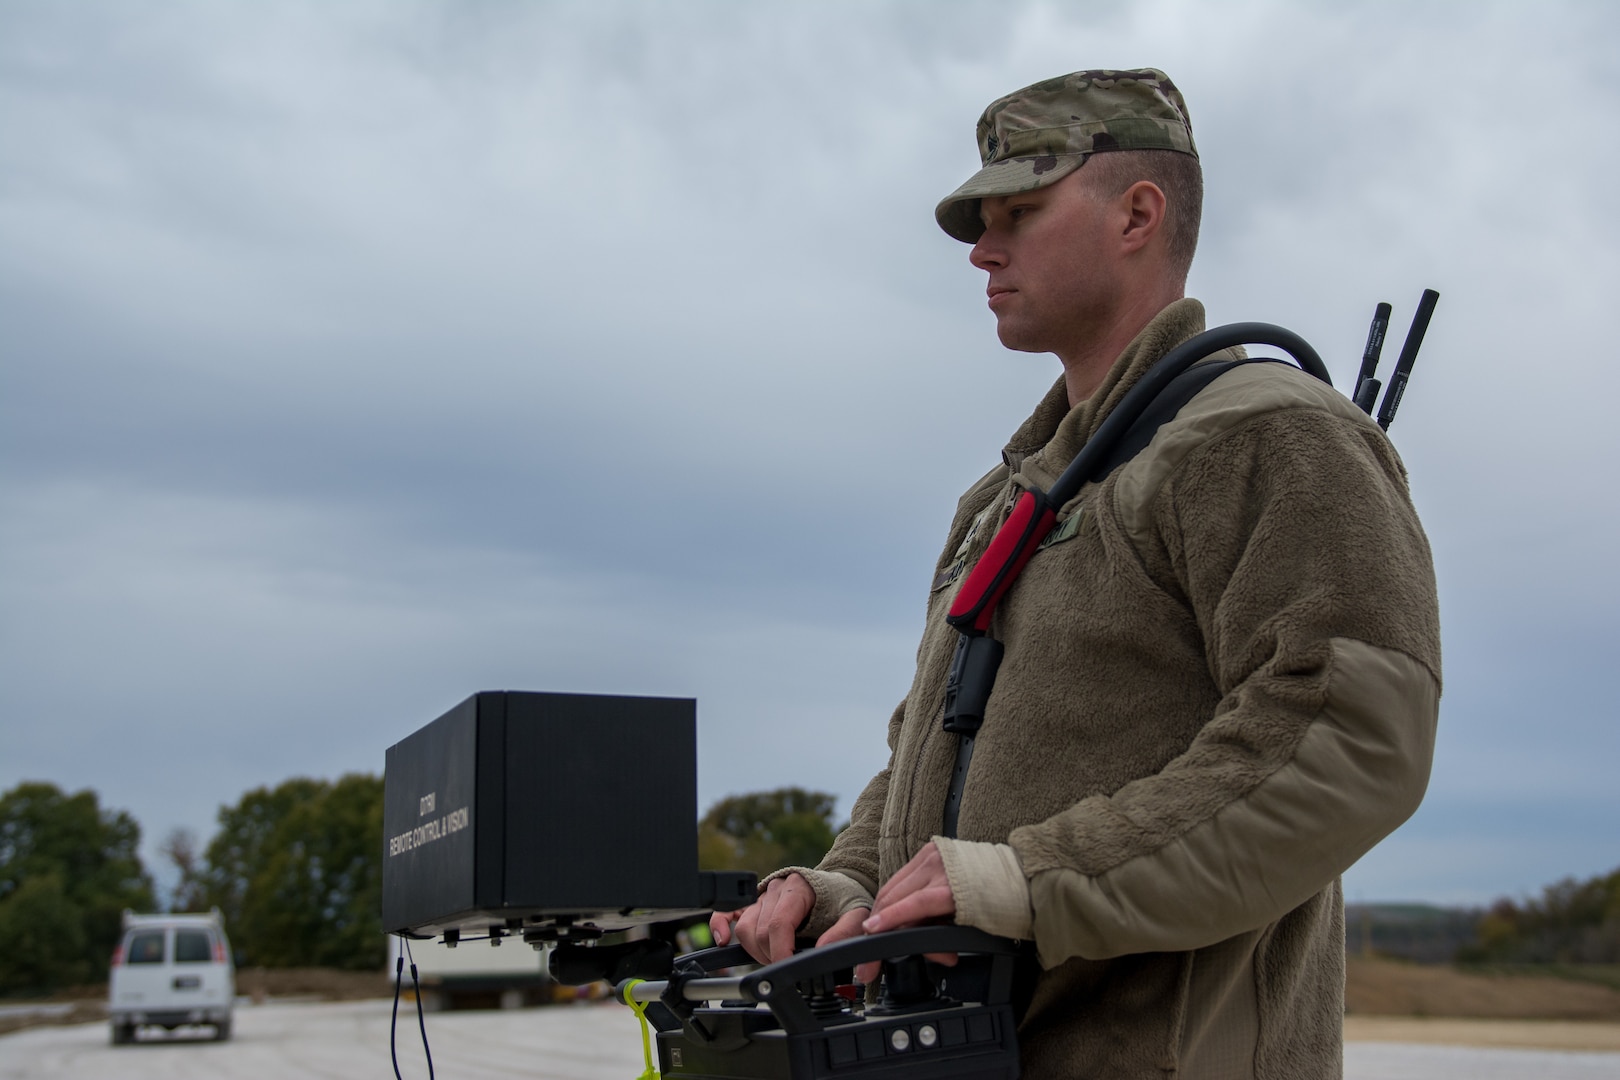 U.S. Army Reserve engineers experiment with remote-controlled bulldozer